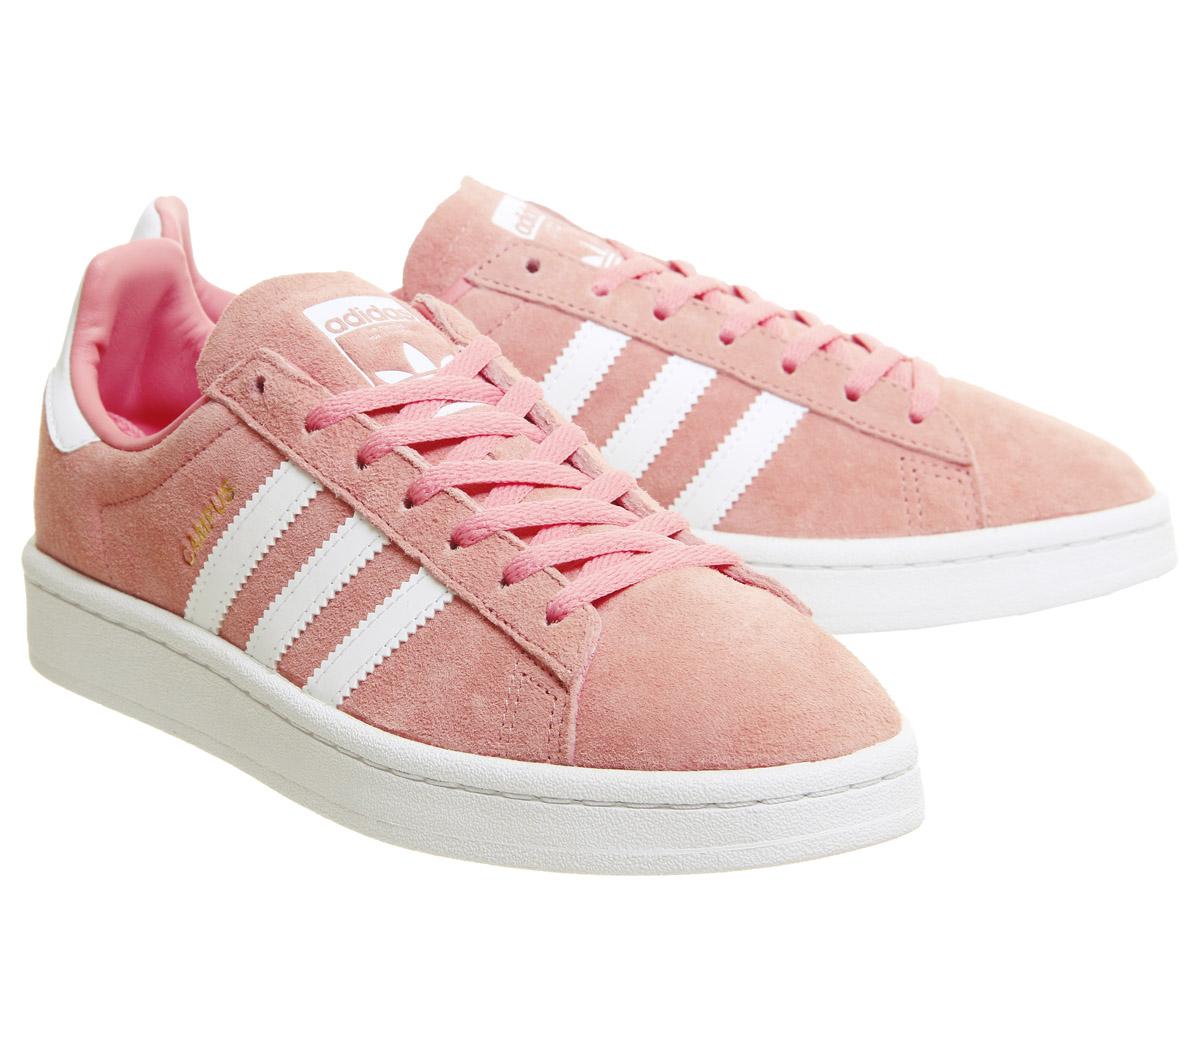 adidas Campus Trainers Tactile Rose - Hers trainers